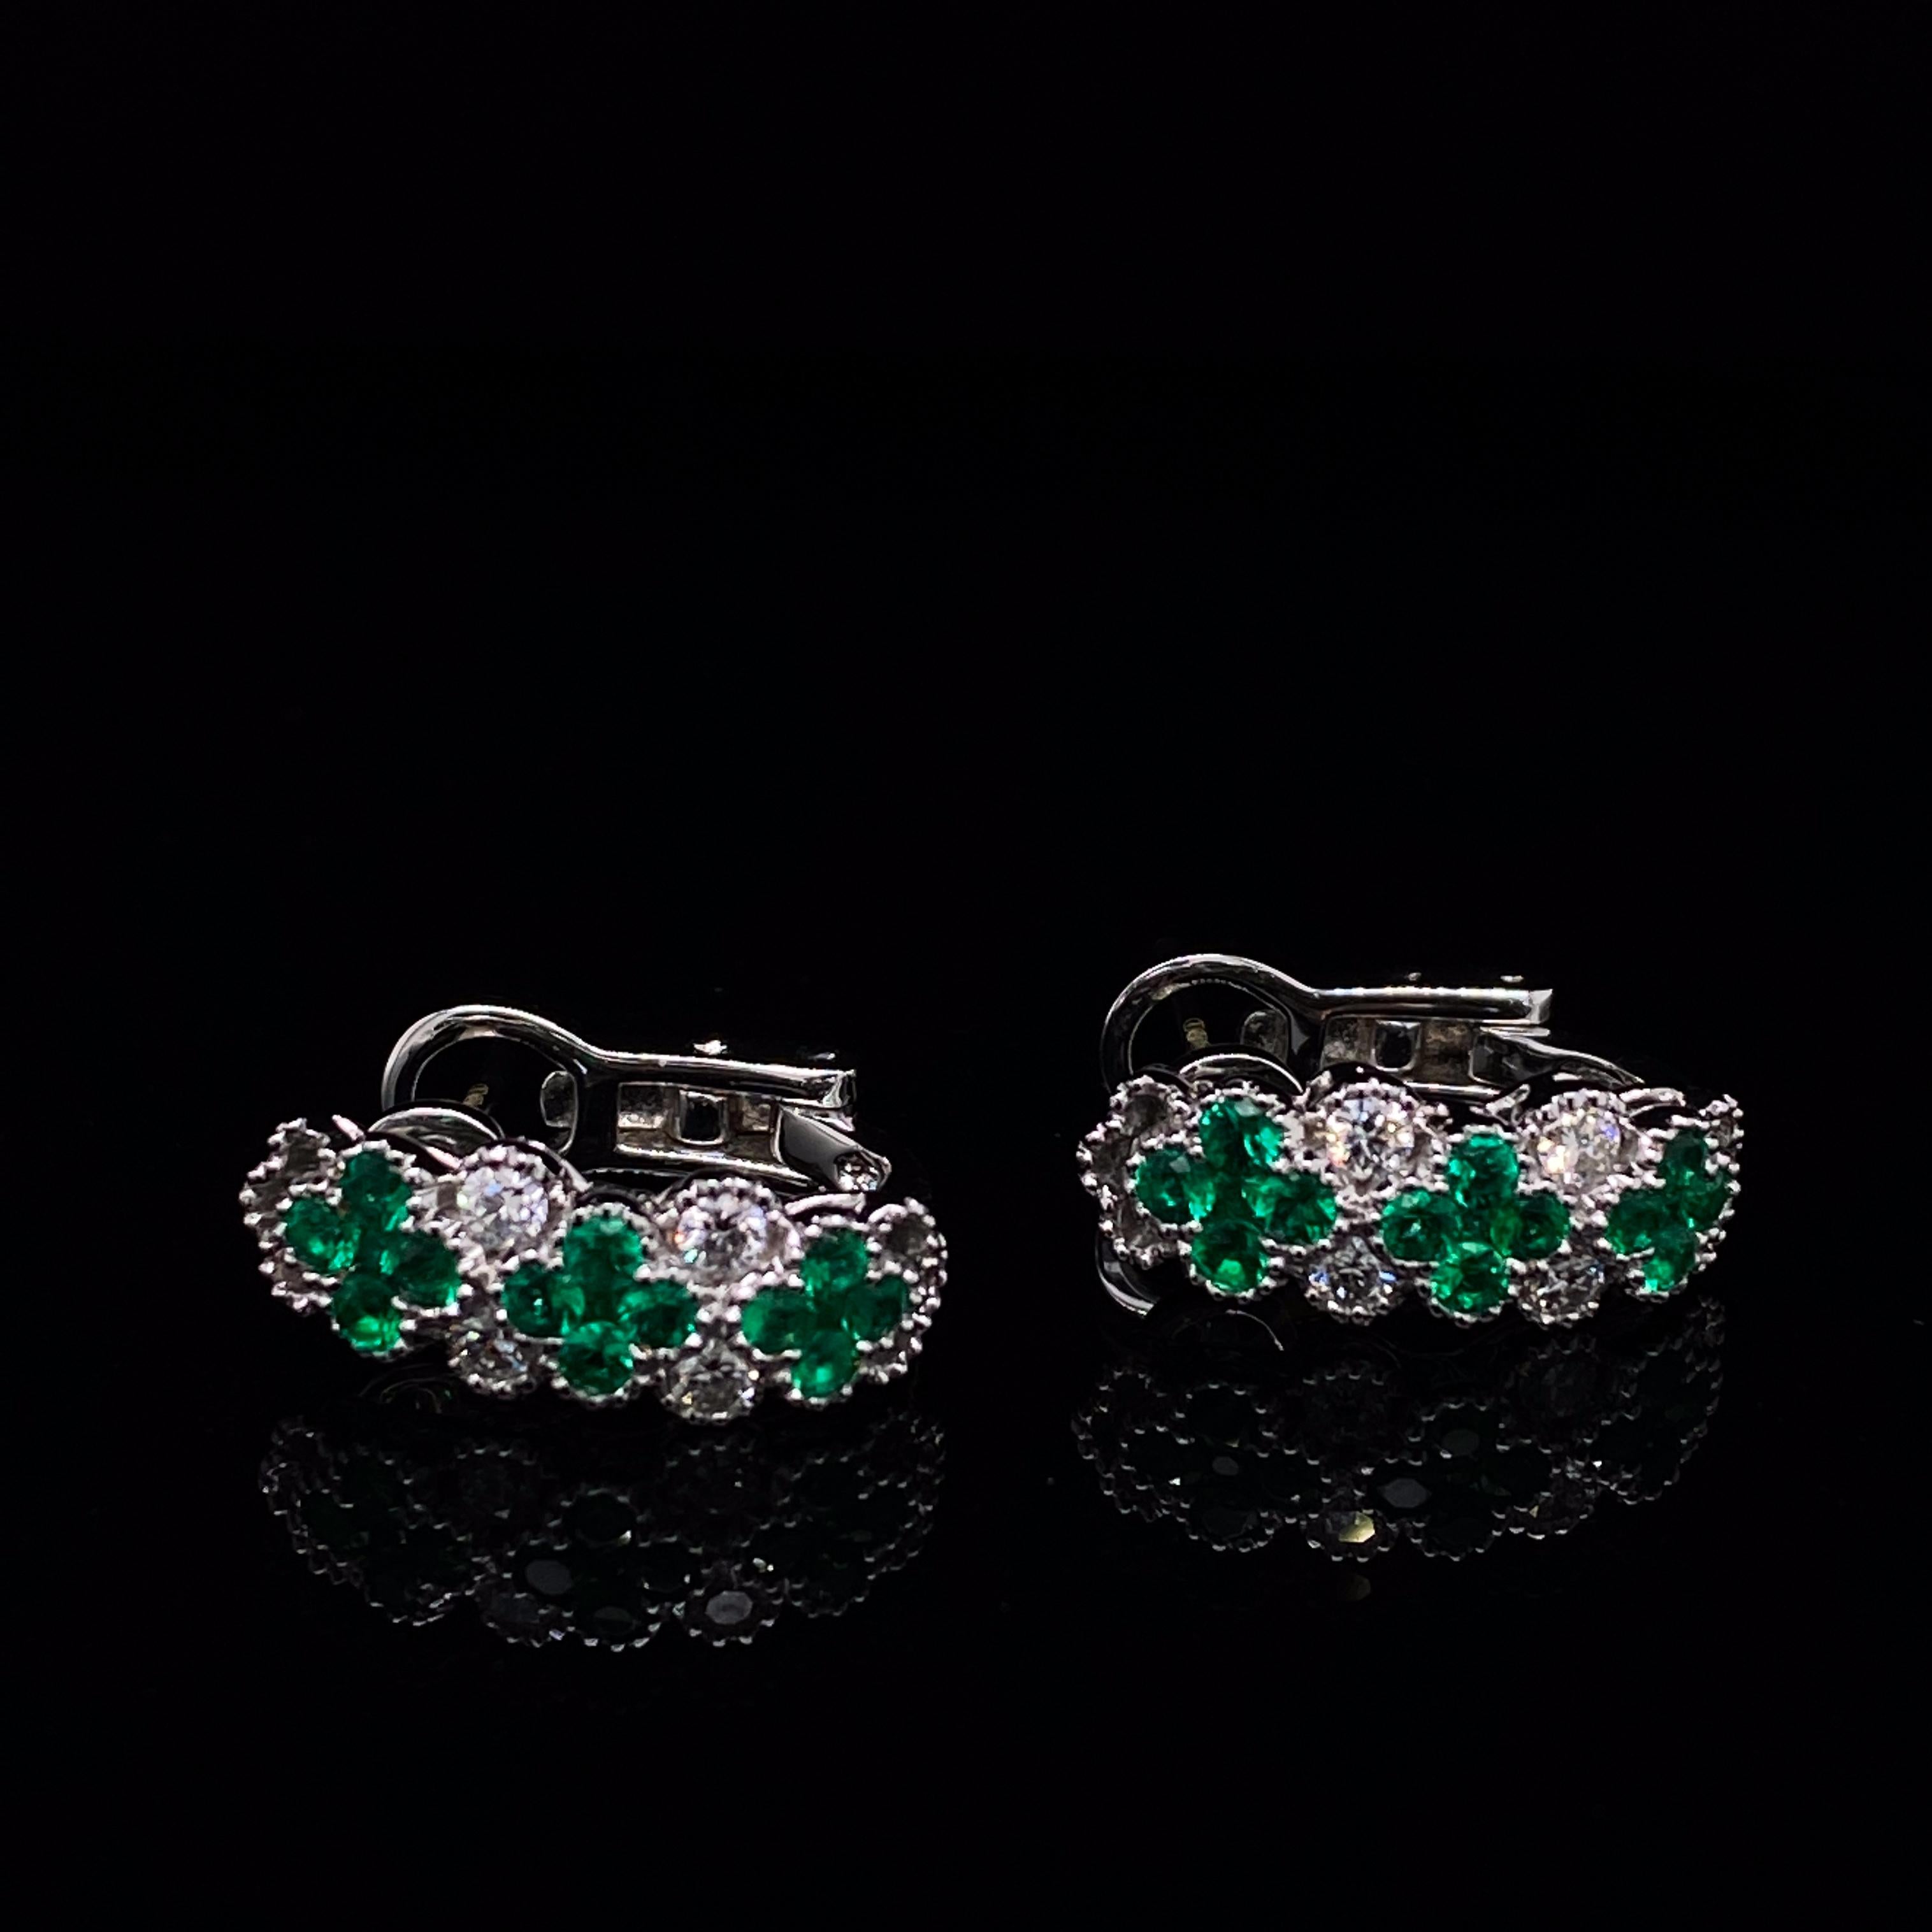 A pair of emerald and diamond floral hoop earrings 18 karat white gold.

These vibrant emerald and diamond hoop earrings are set on a claw setting which show off the emerald colour to great effect.
Comprised of three flowers formed by 4 individual